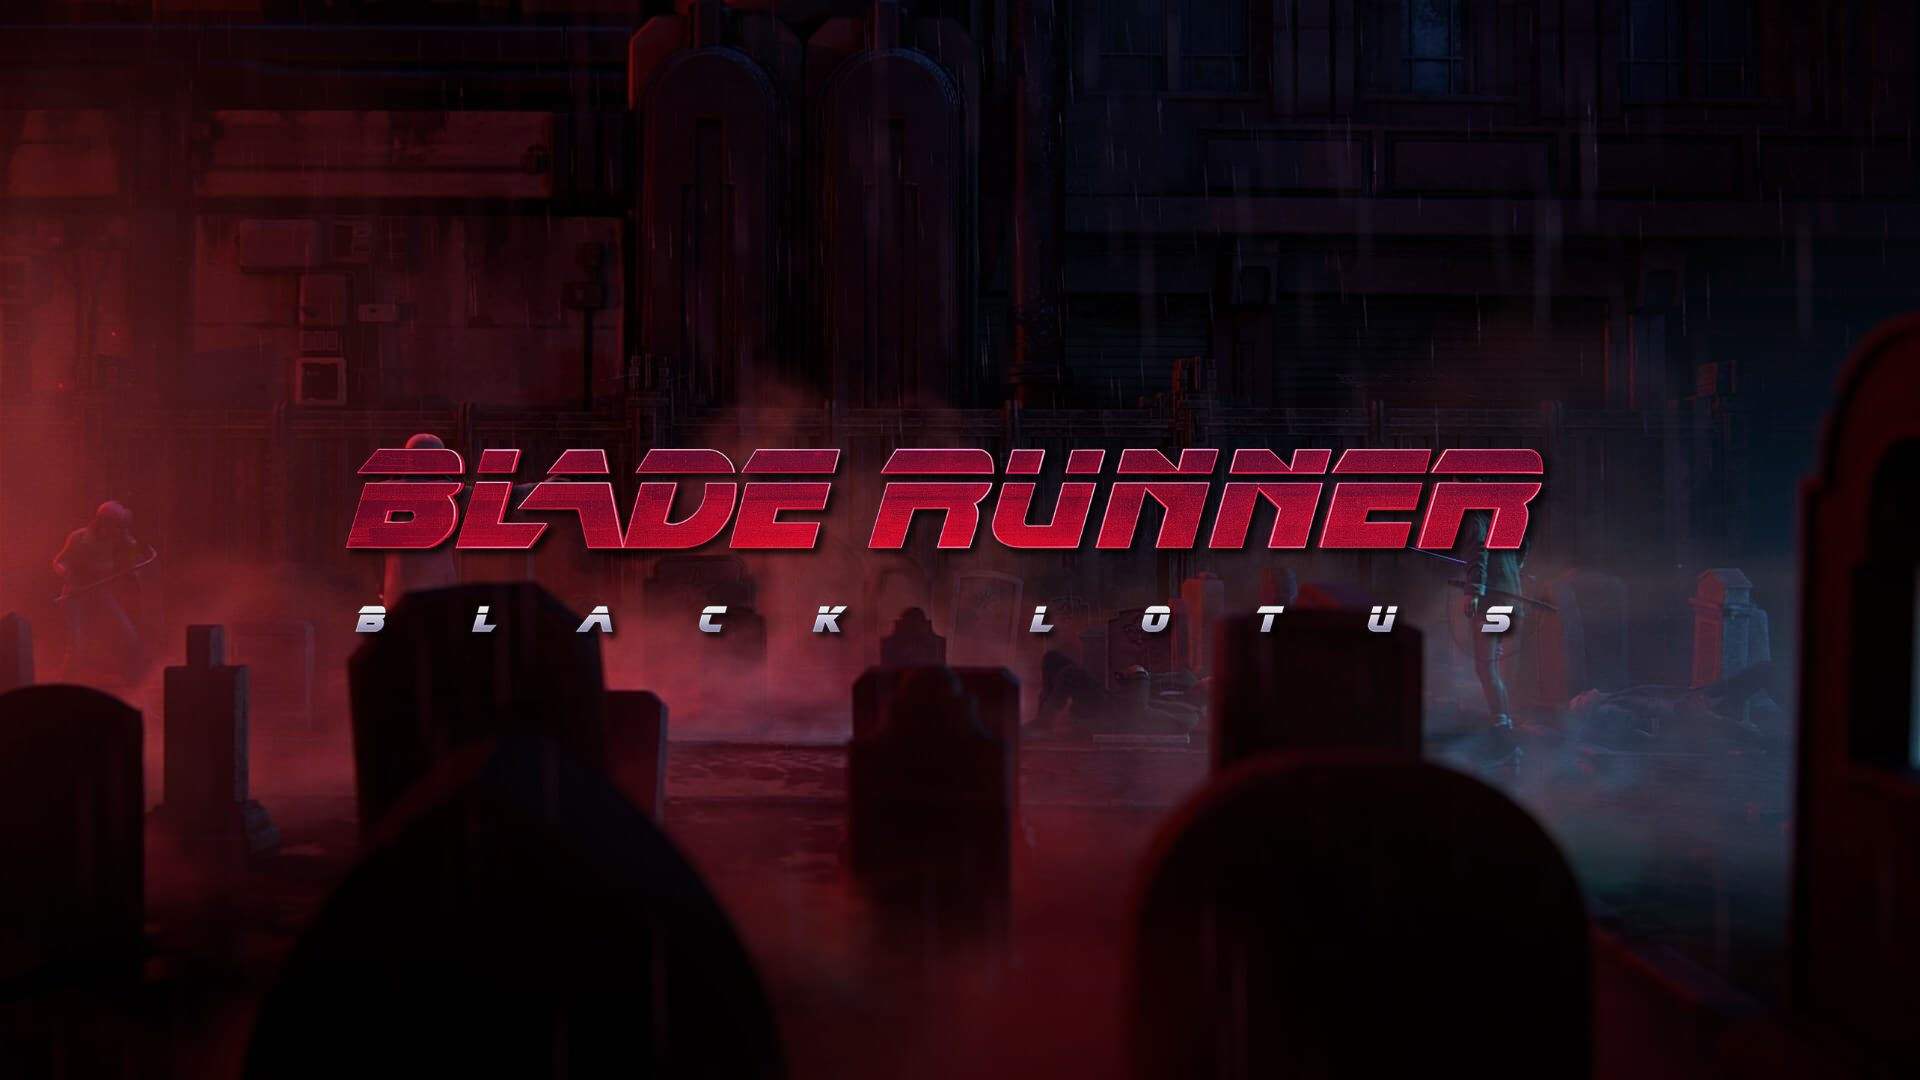 Opening For Blade Runner Black Lotus Anime Show Released! of the Force